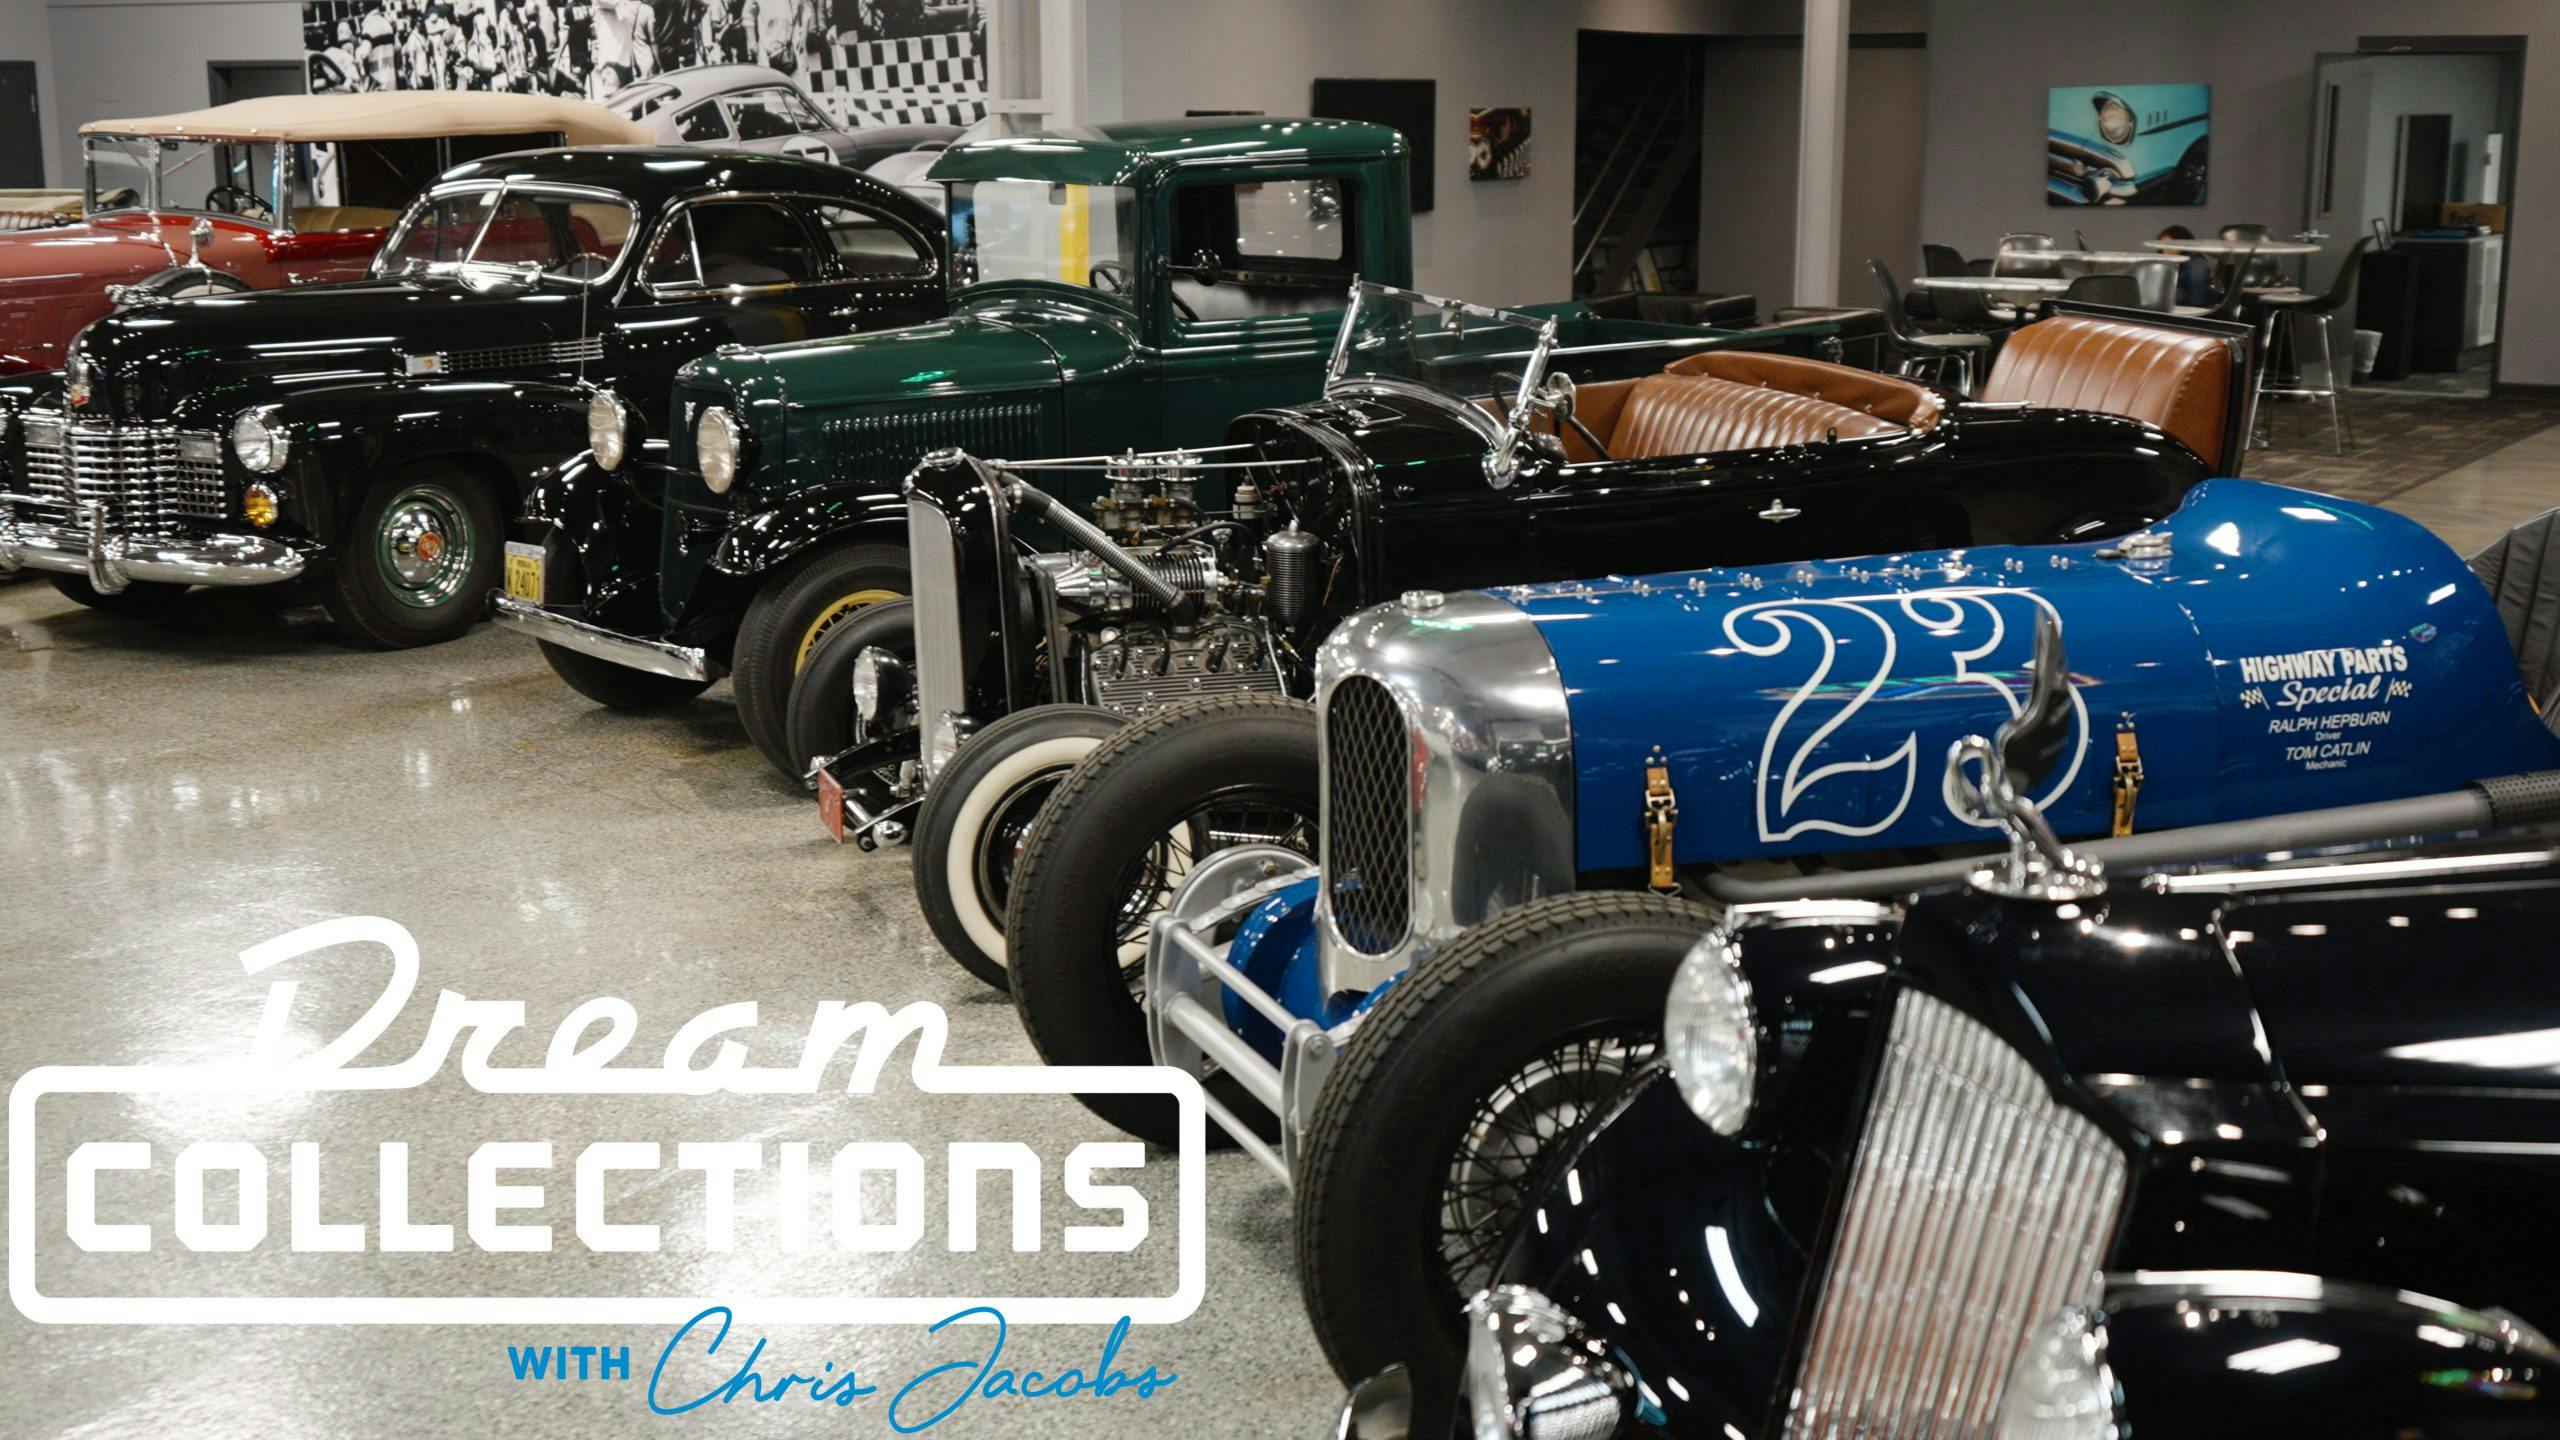 Get the latest episodes of Dream Collections with Chris Jacobs